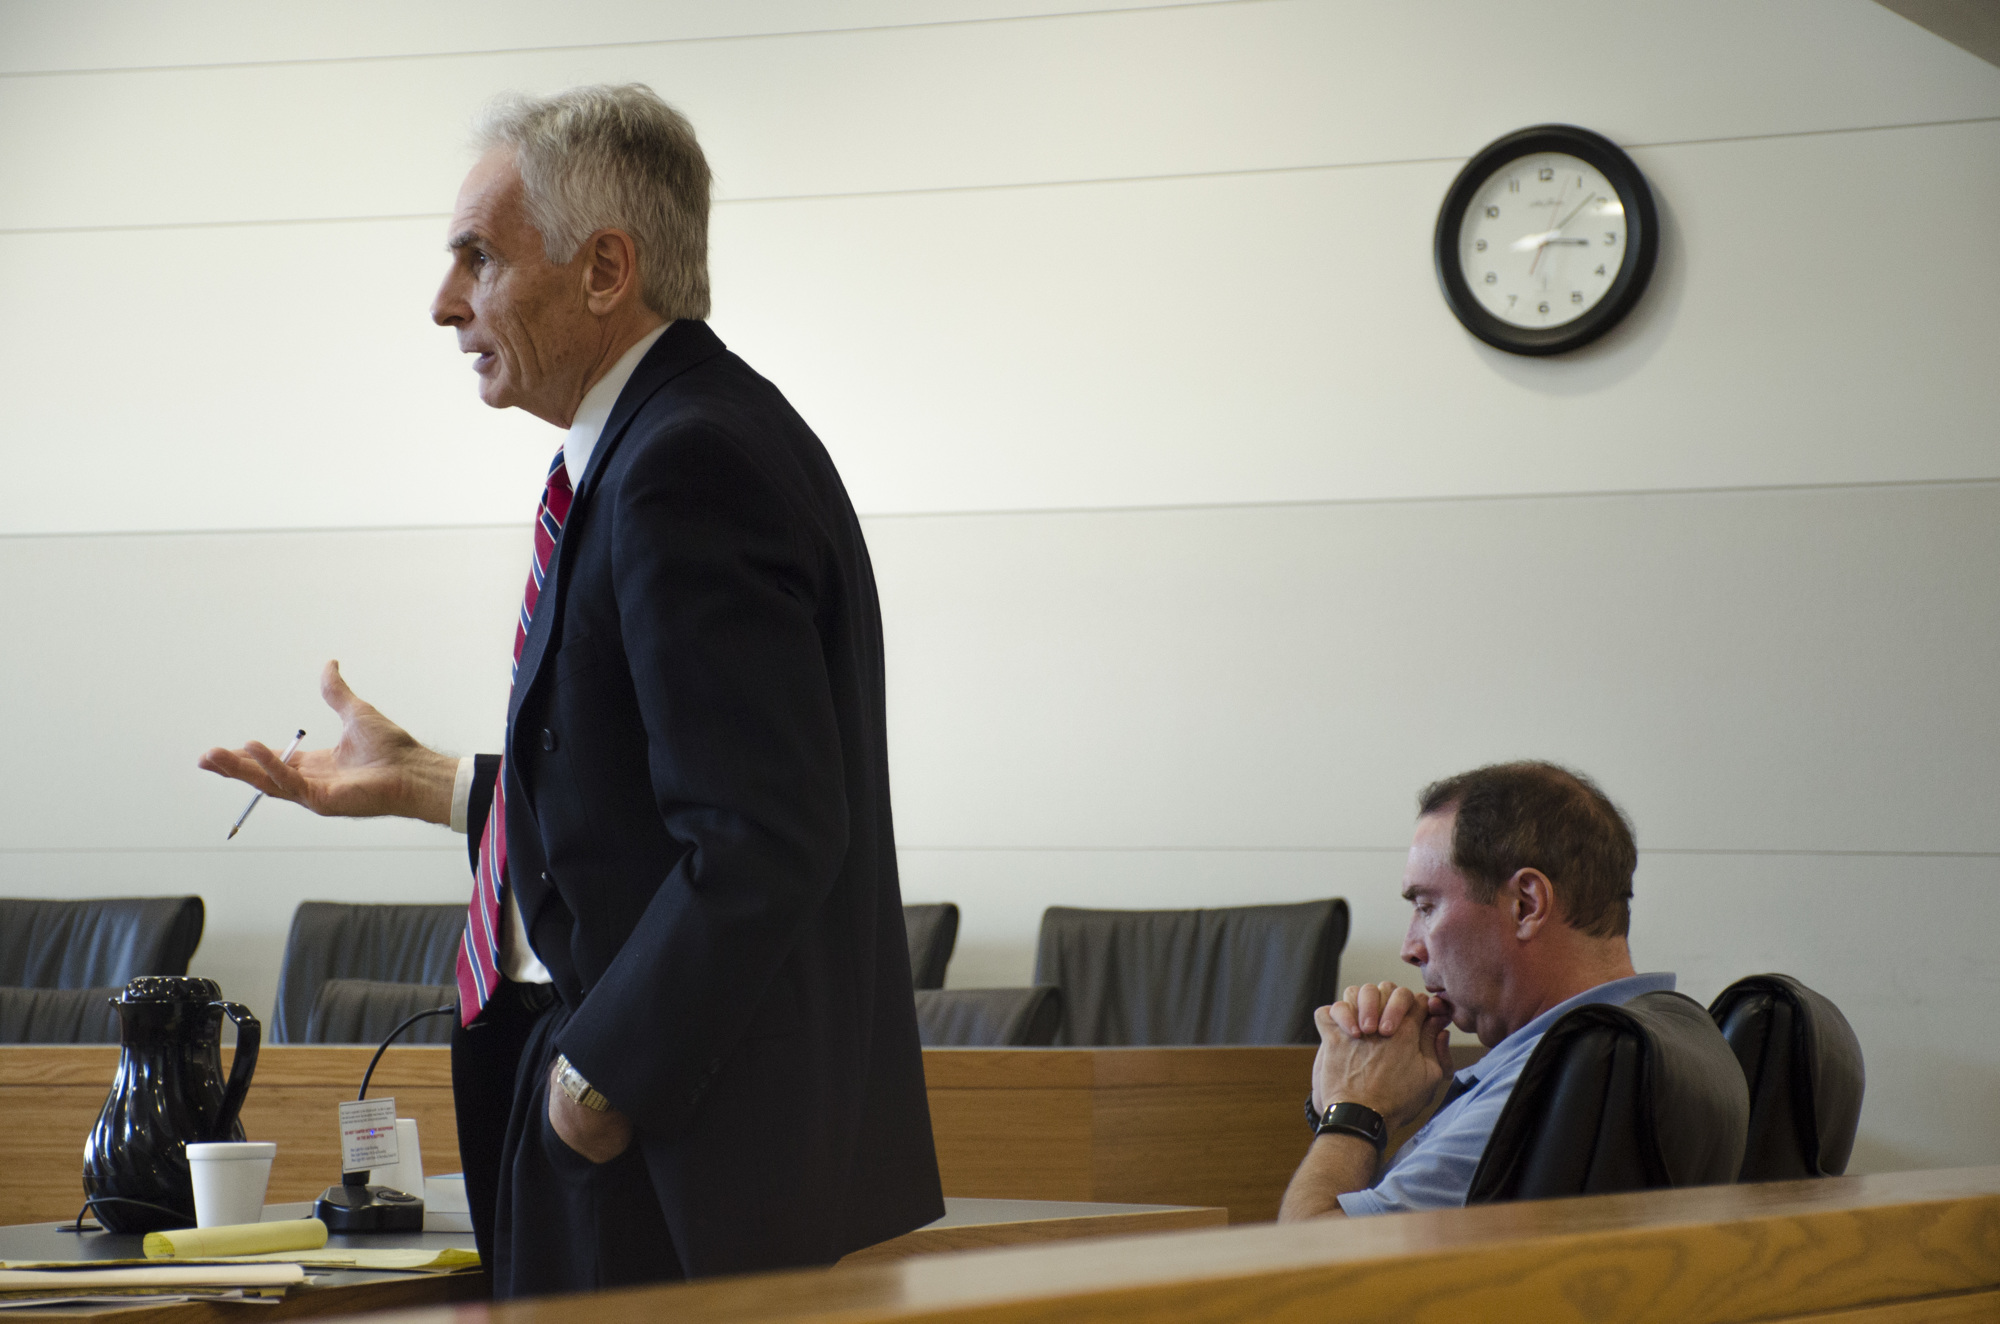 Wayne Natt, right, and his attorney, Michael Gelety, at an adversarial preliminary hearing in 2017.